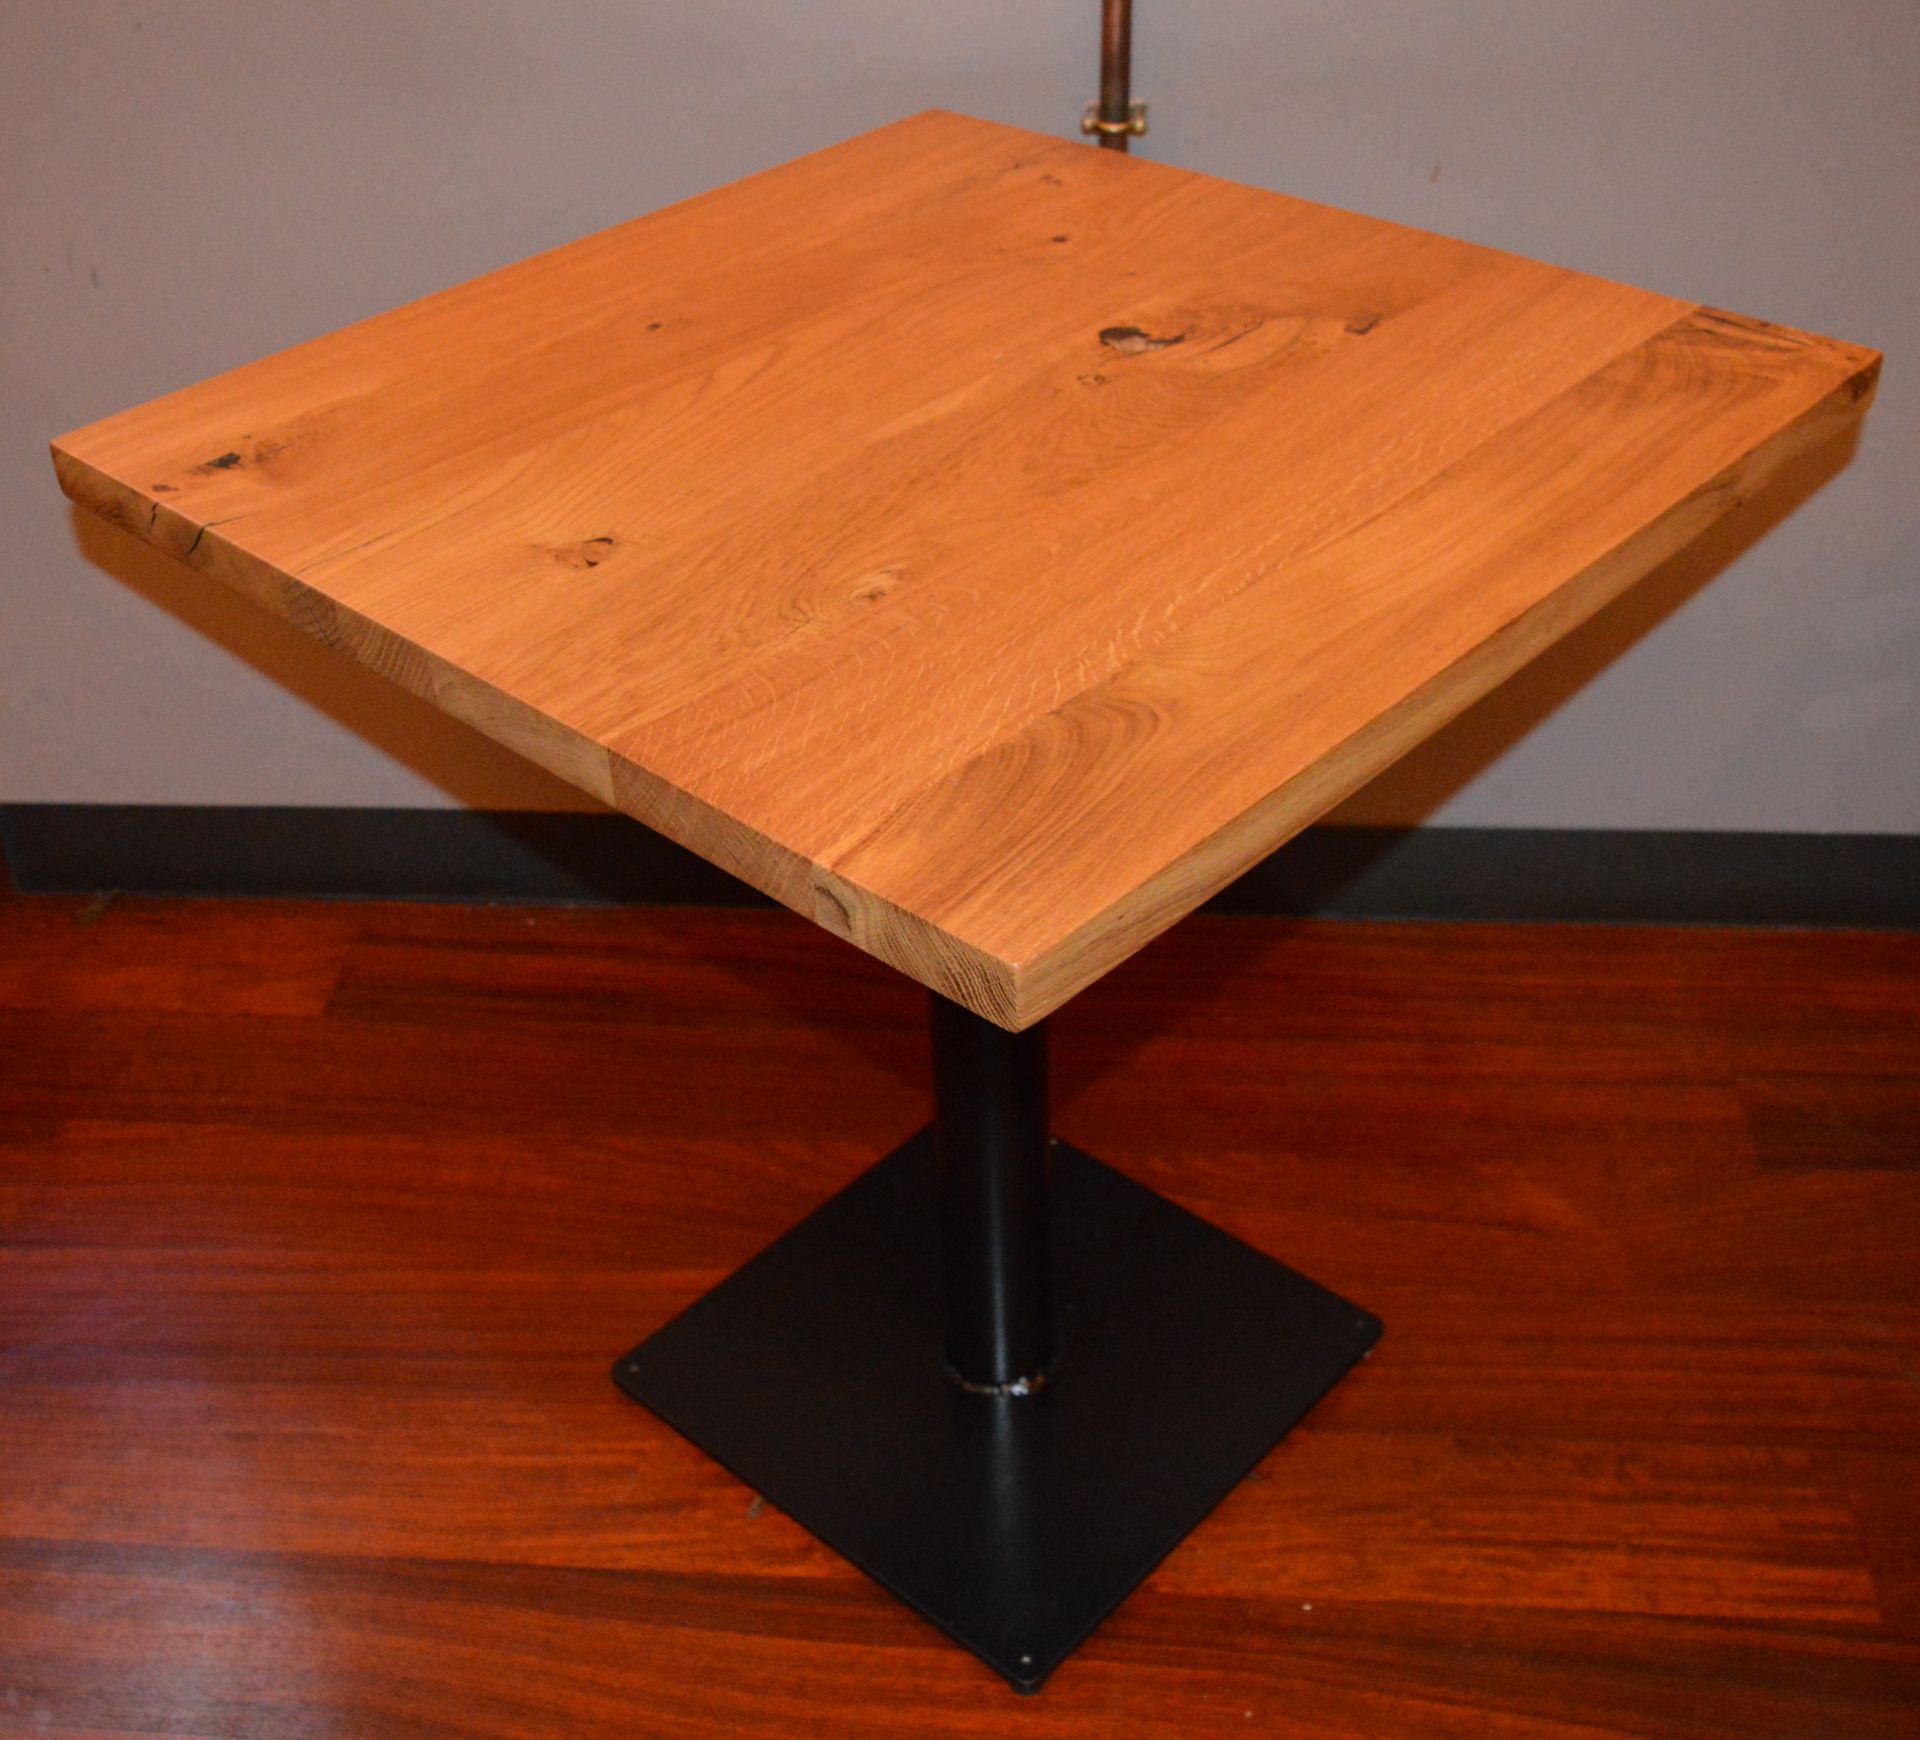 4 x Rustic Knotty Oak Bistro Tables - Suitable For Pubs & Restaurants - Substantial Bases With Solid